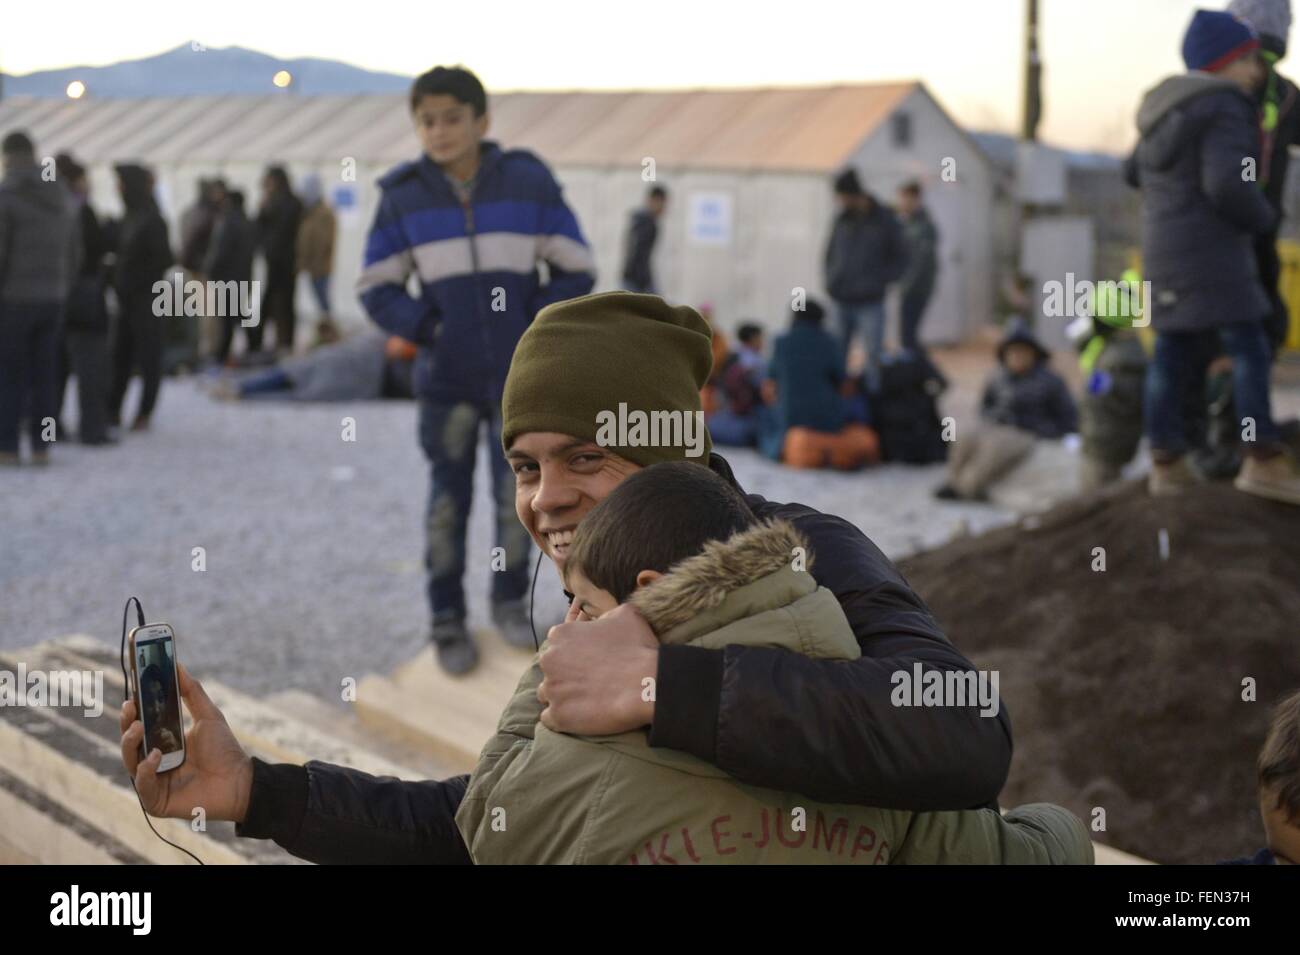 (160208) -- GEVGELIJA, Feb. 8, 2016 (Xinhua) -- Refugees make a video call with their families at a refugee camp in Gevgelija, Macedonian south border to Greece on Feb. 7, 2016.  More than one thousand migrants go across Macedonia's border everyday, most of them are from Syria, Afghanistan and Iraq. With the support of UNHCR, Macedonian government and NGOs, the refugees camps give fully free support to all the migrants transit in Macedonia, by providing sleeping mats, blankets, tents and accommodation halls, food, drinks, WIFI, medical assistance, sanitary items, as well as advice and counsell Stock Photo